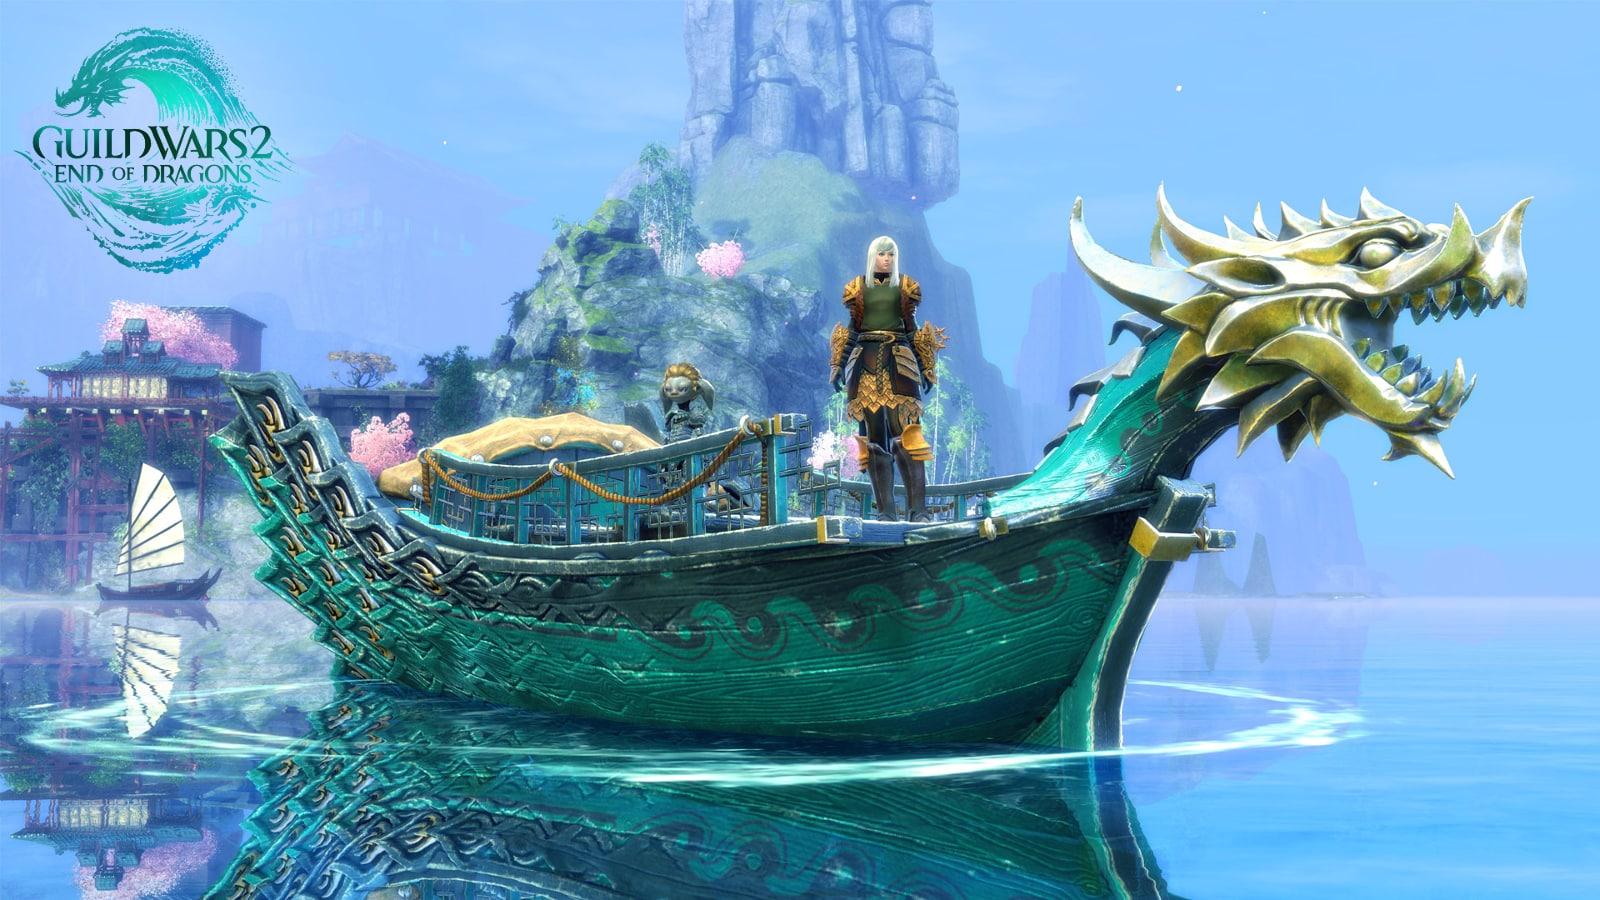 guild wars 2 characters on a skiff